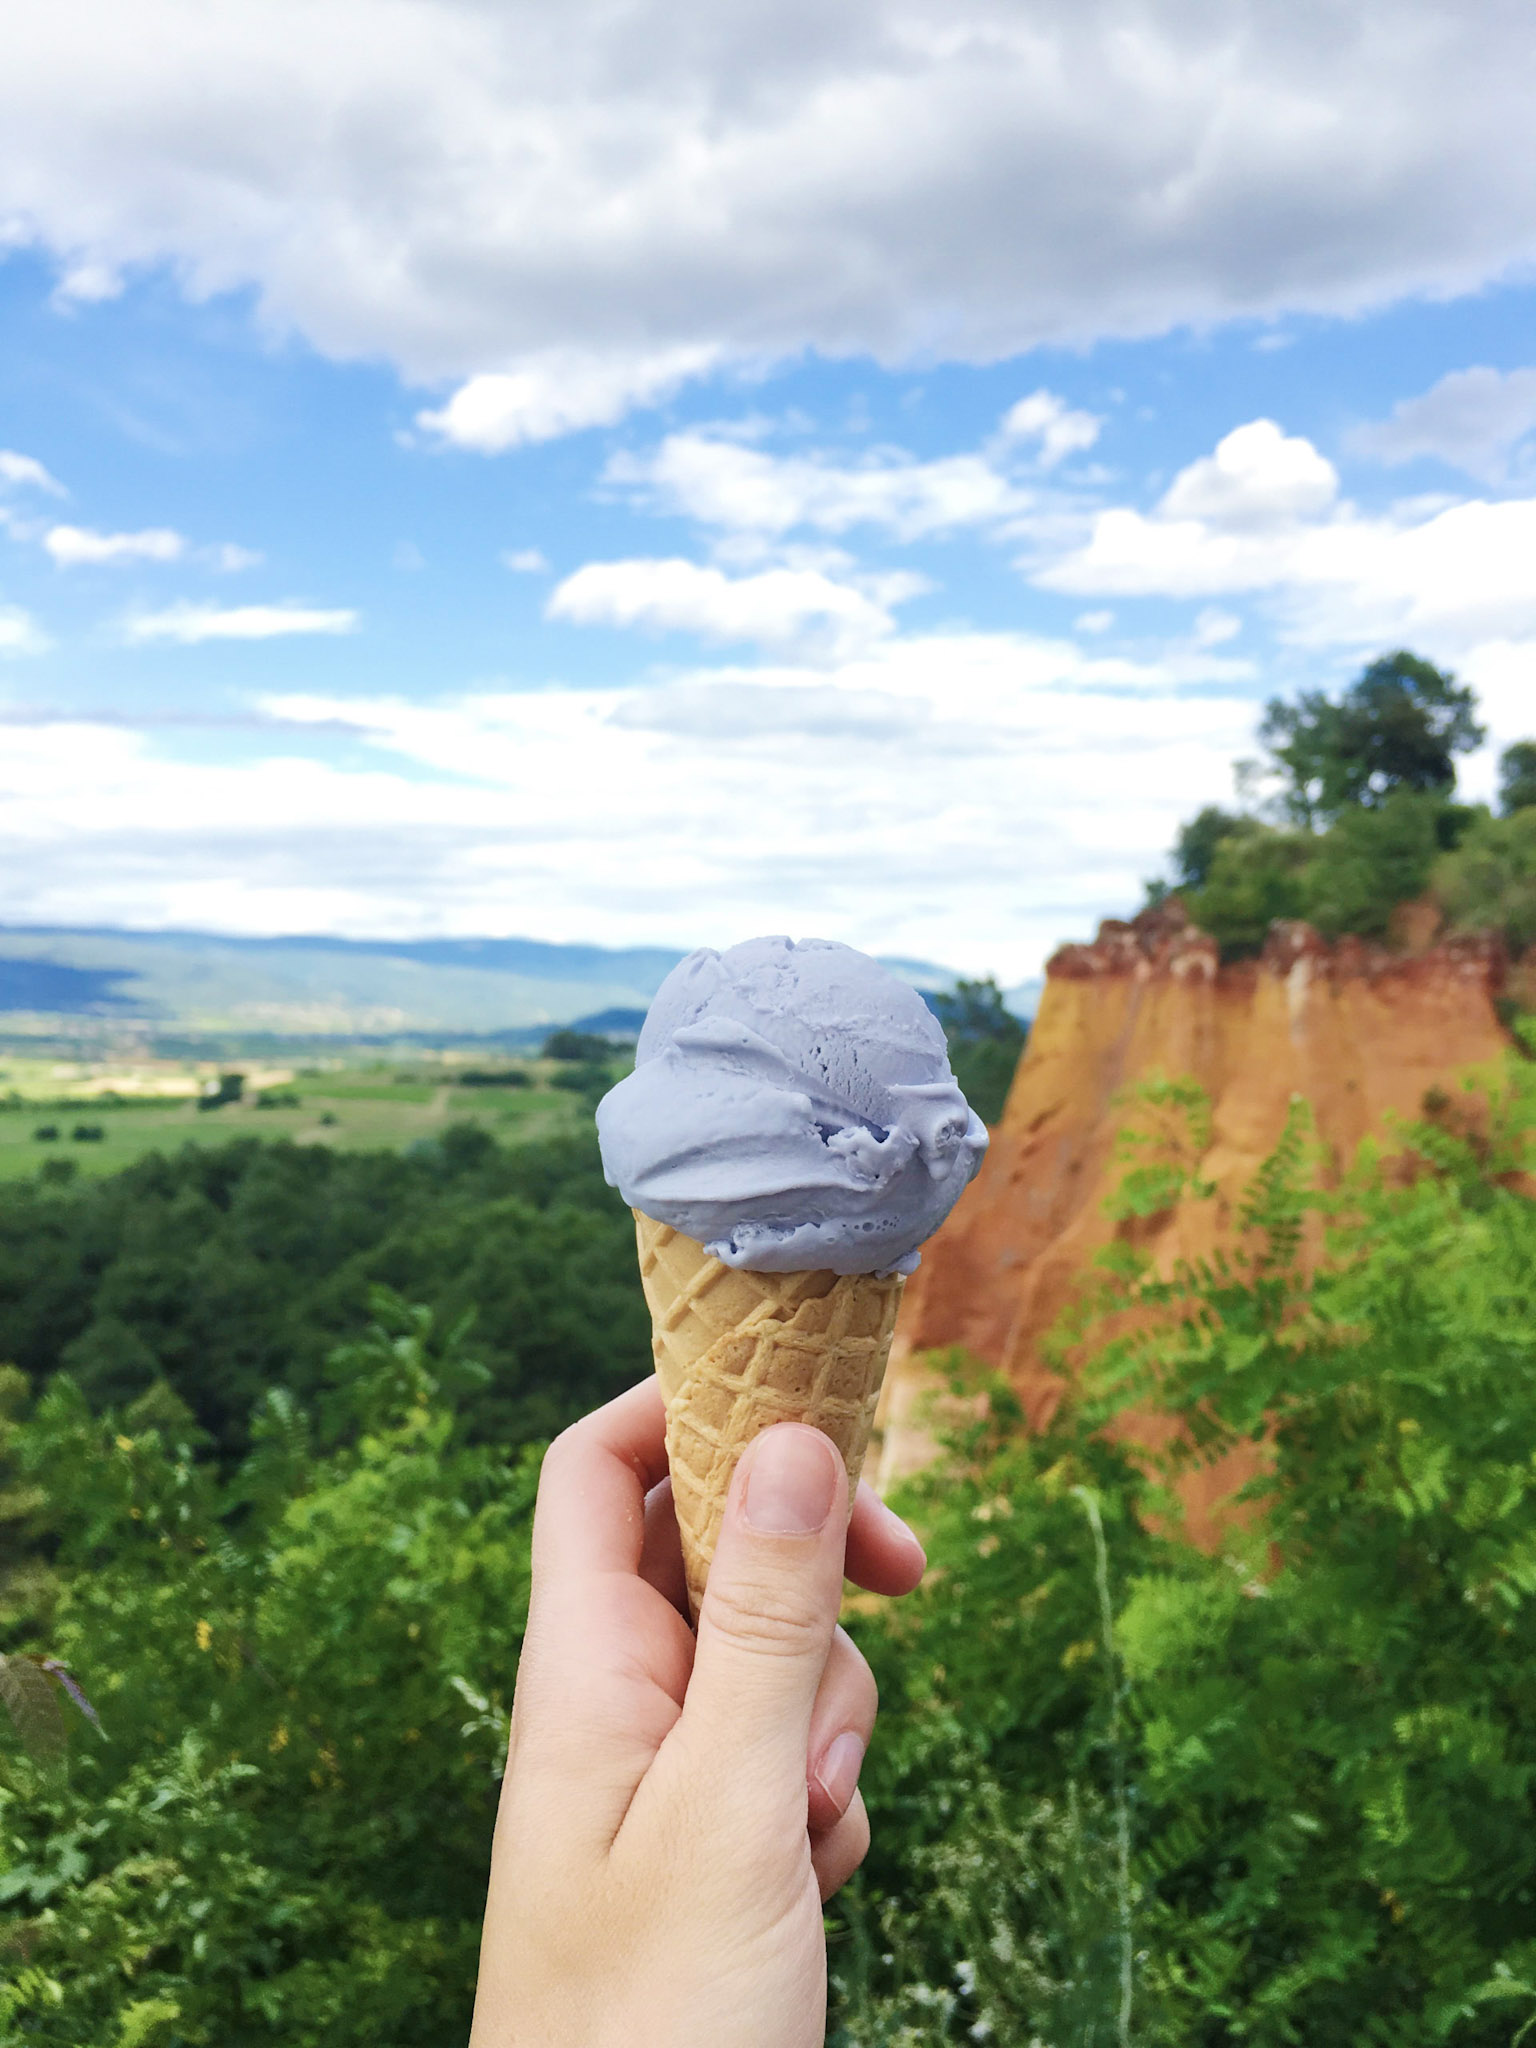 Lavender ice cream and Ochre cliffs in Roussillon, France | #mfrancisdesigntravels